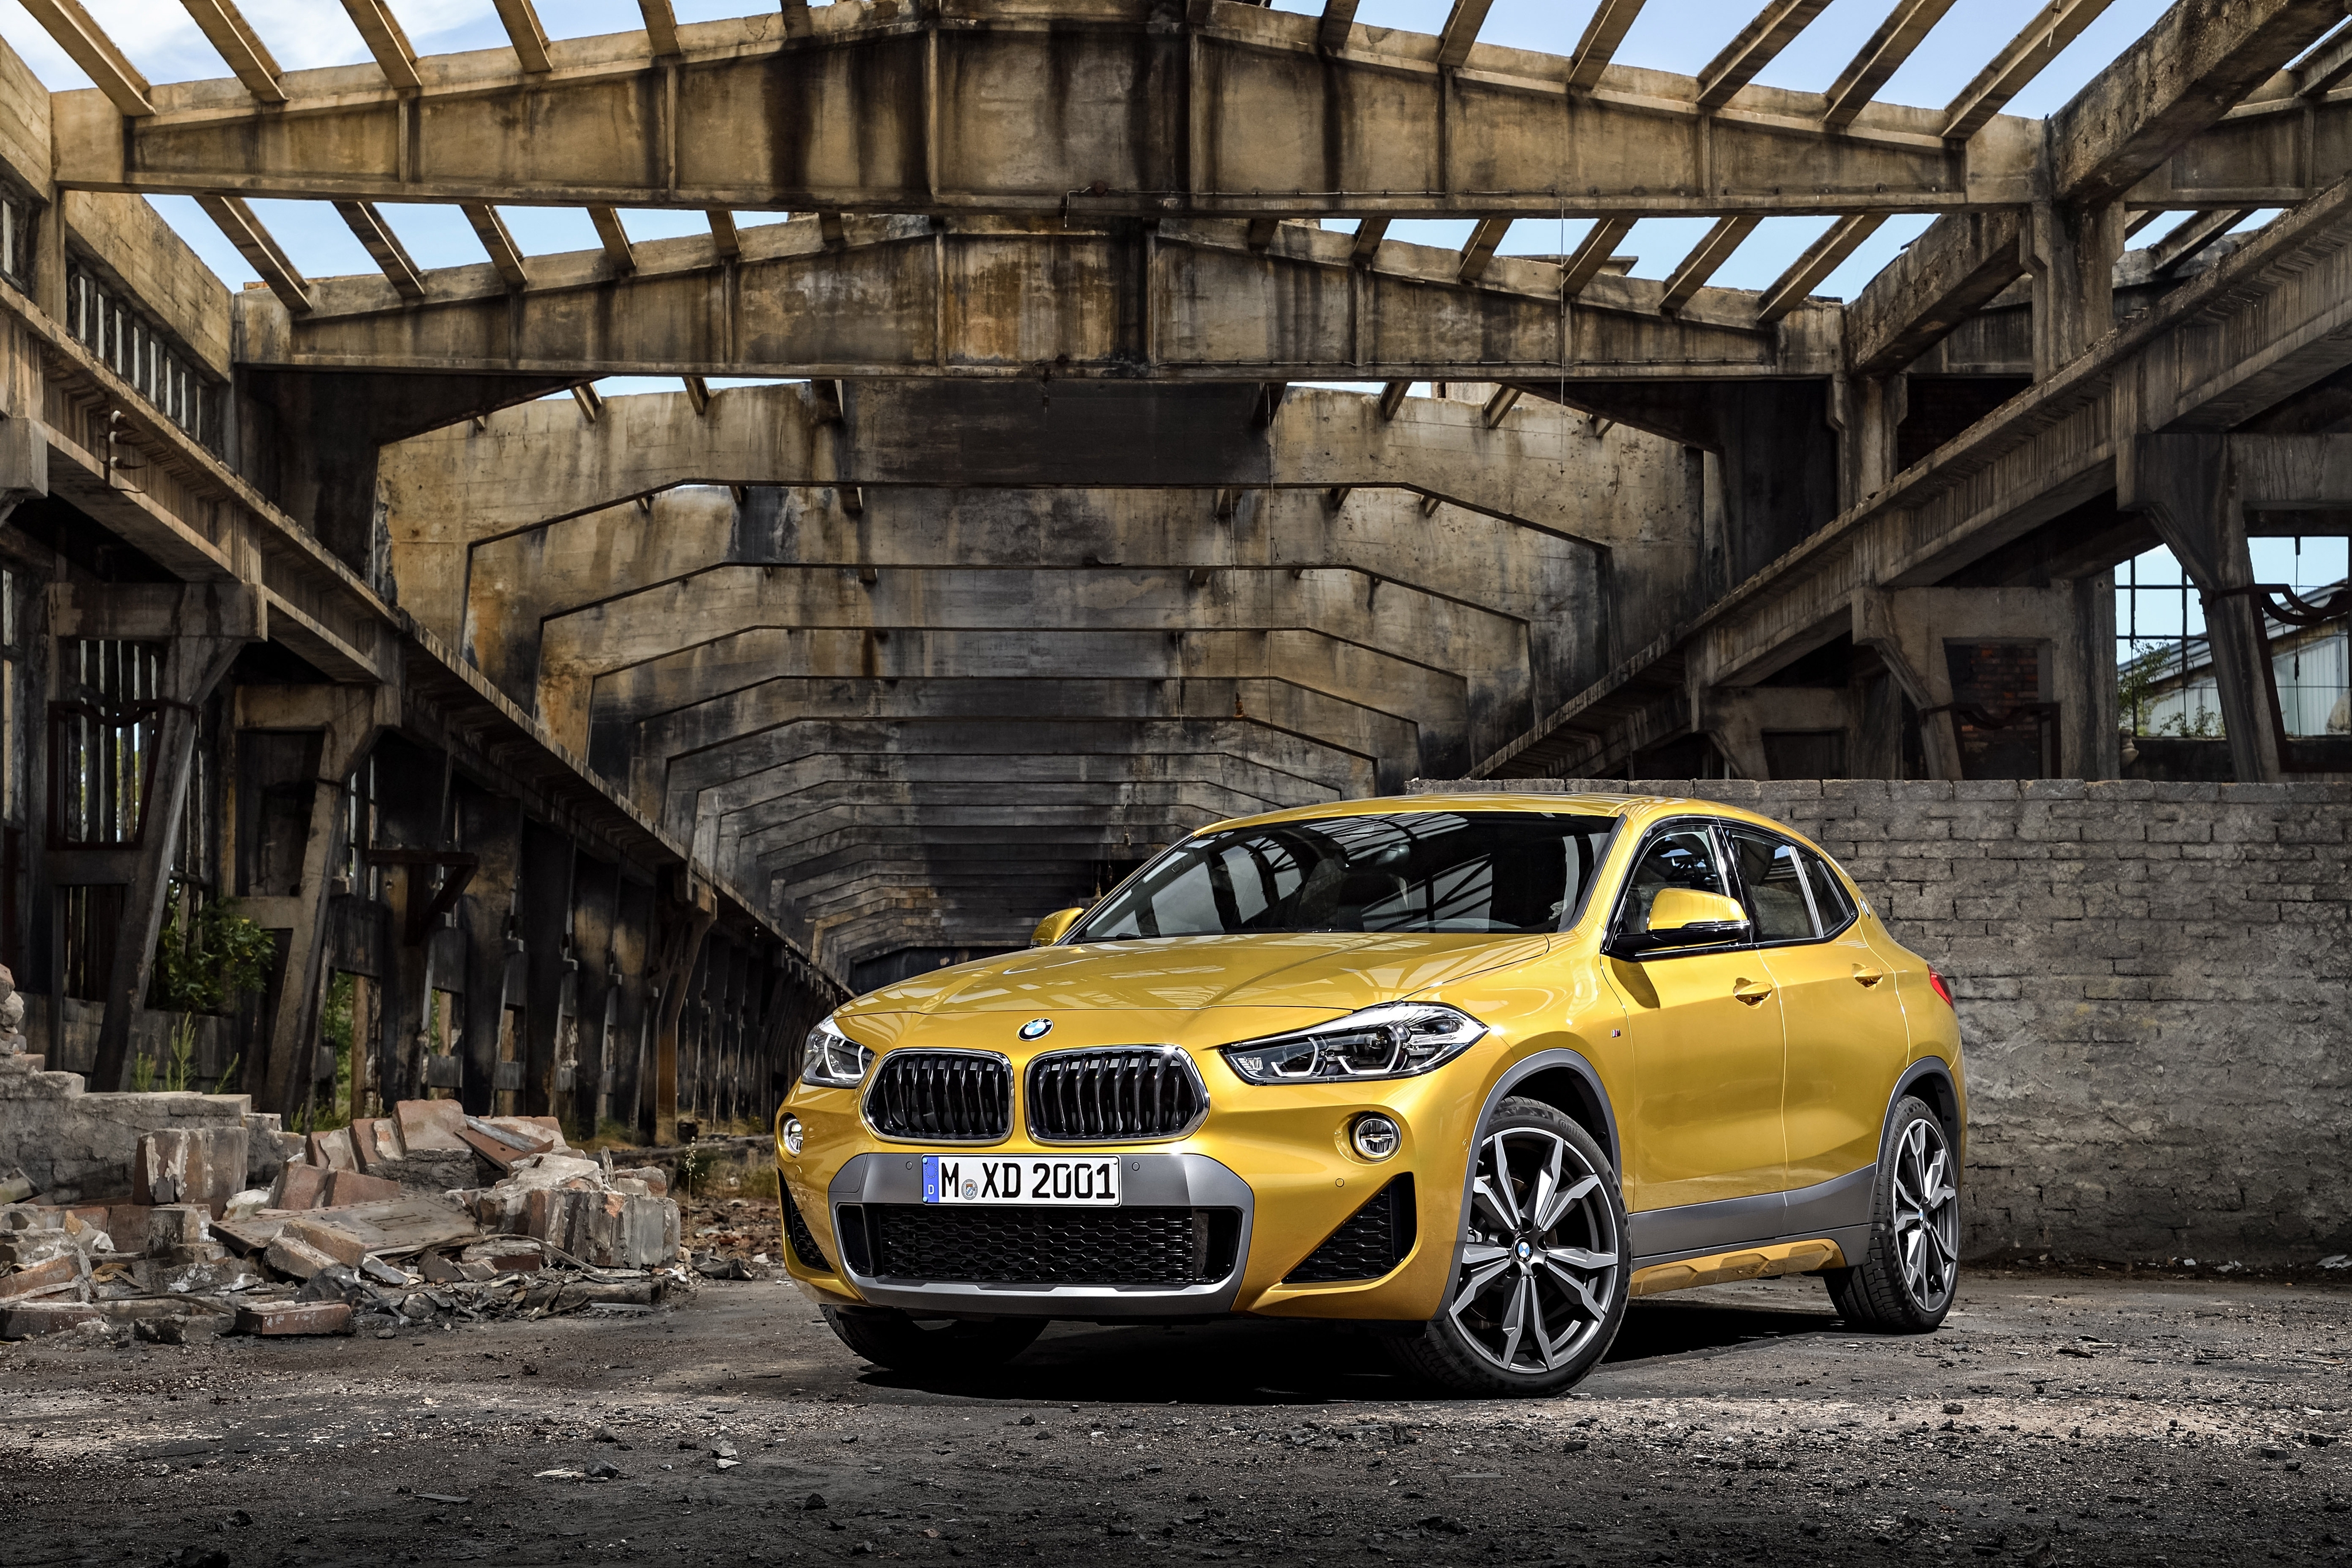 Free photo A gold-colored Bmw x2